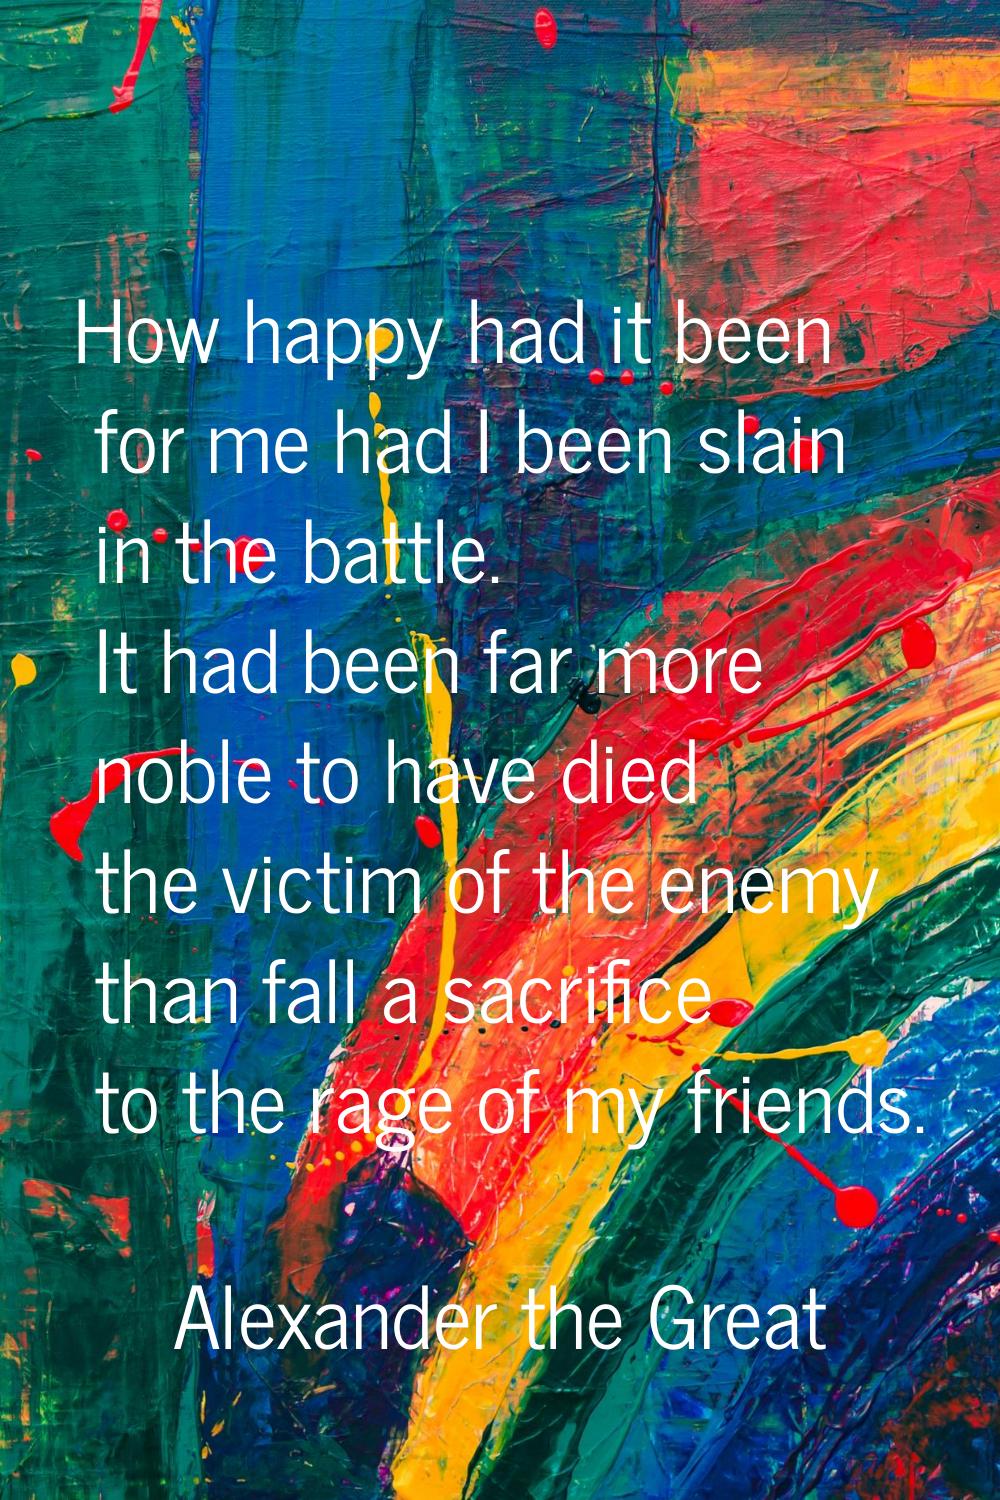 How happy had it been for me had I been slain in the battle. It had been far more noble to have die